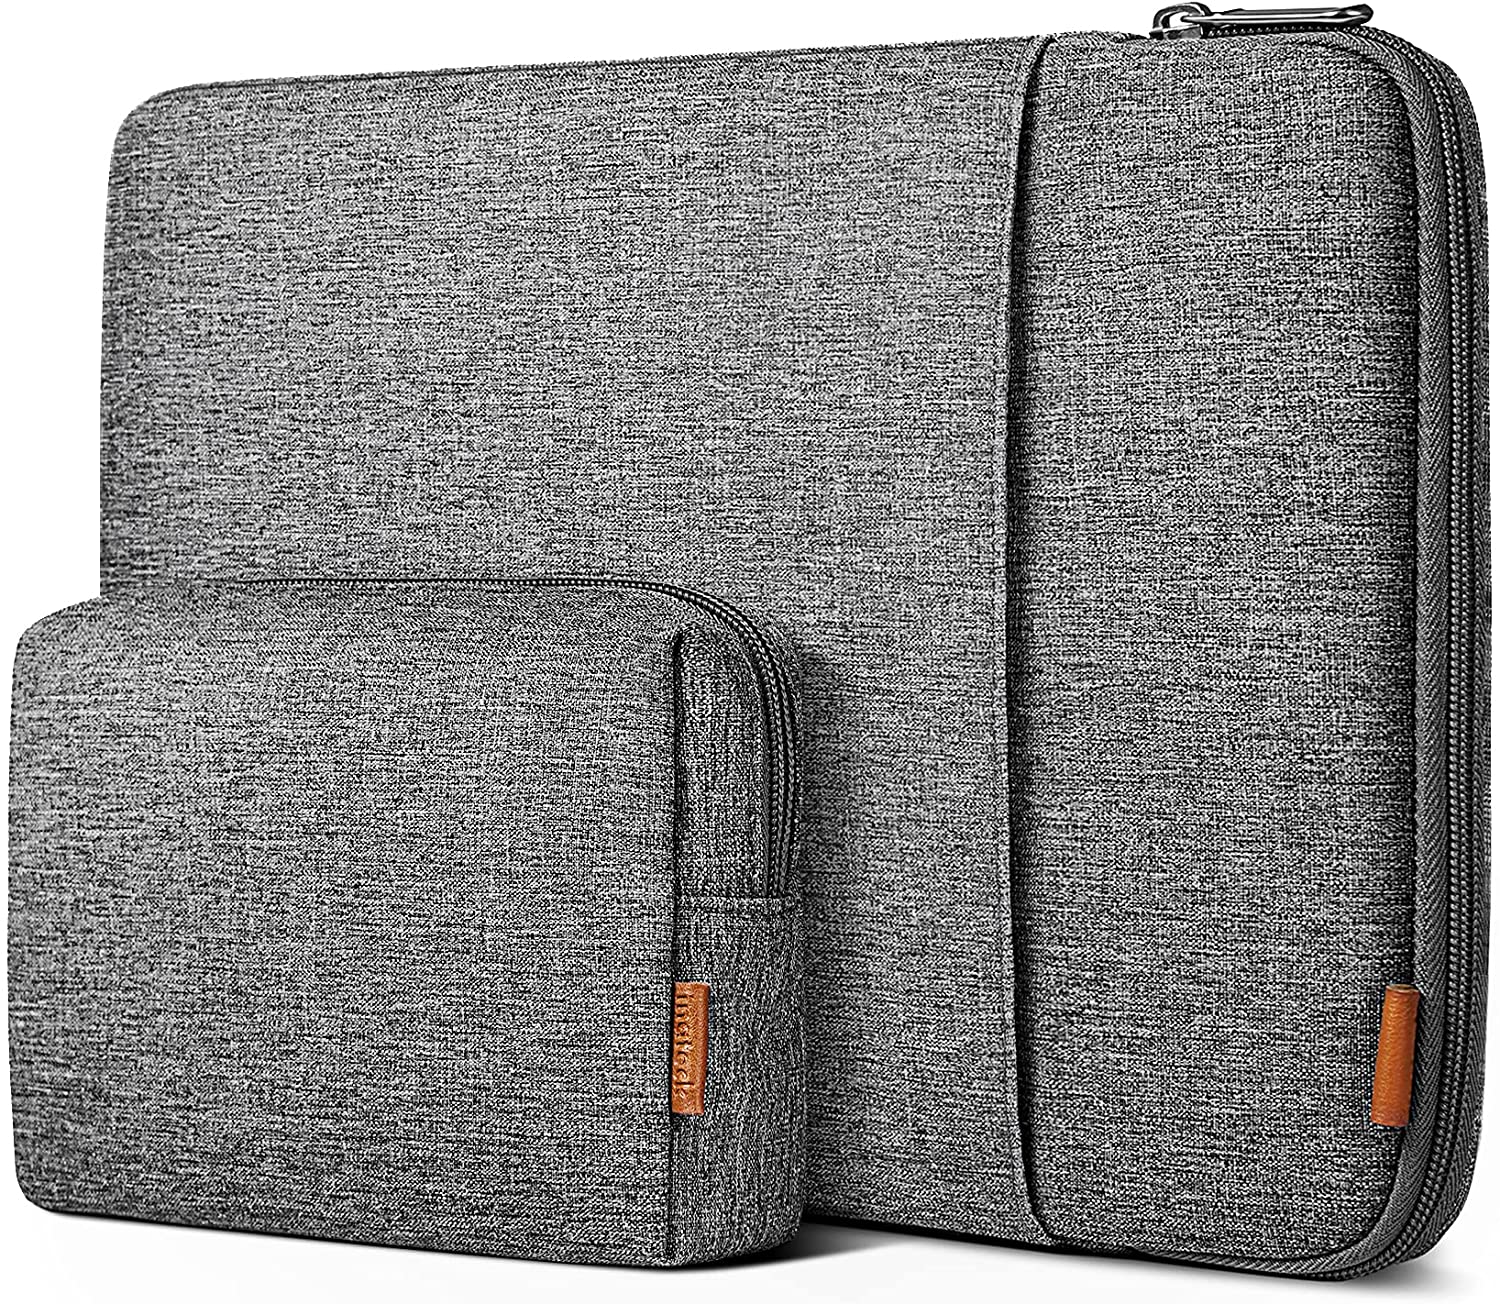 Inateck 12.3-13 Inch Case Sleeve for MacBook Air Cyber Monday Deal